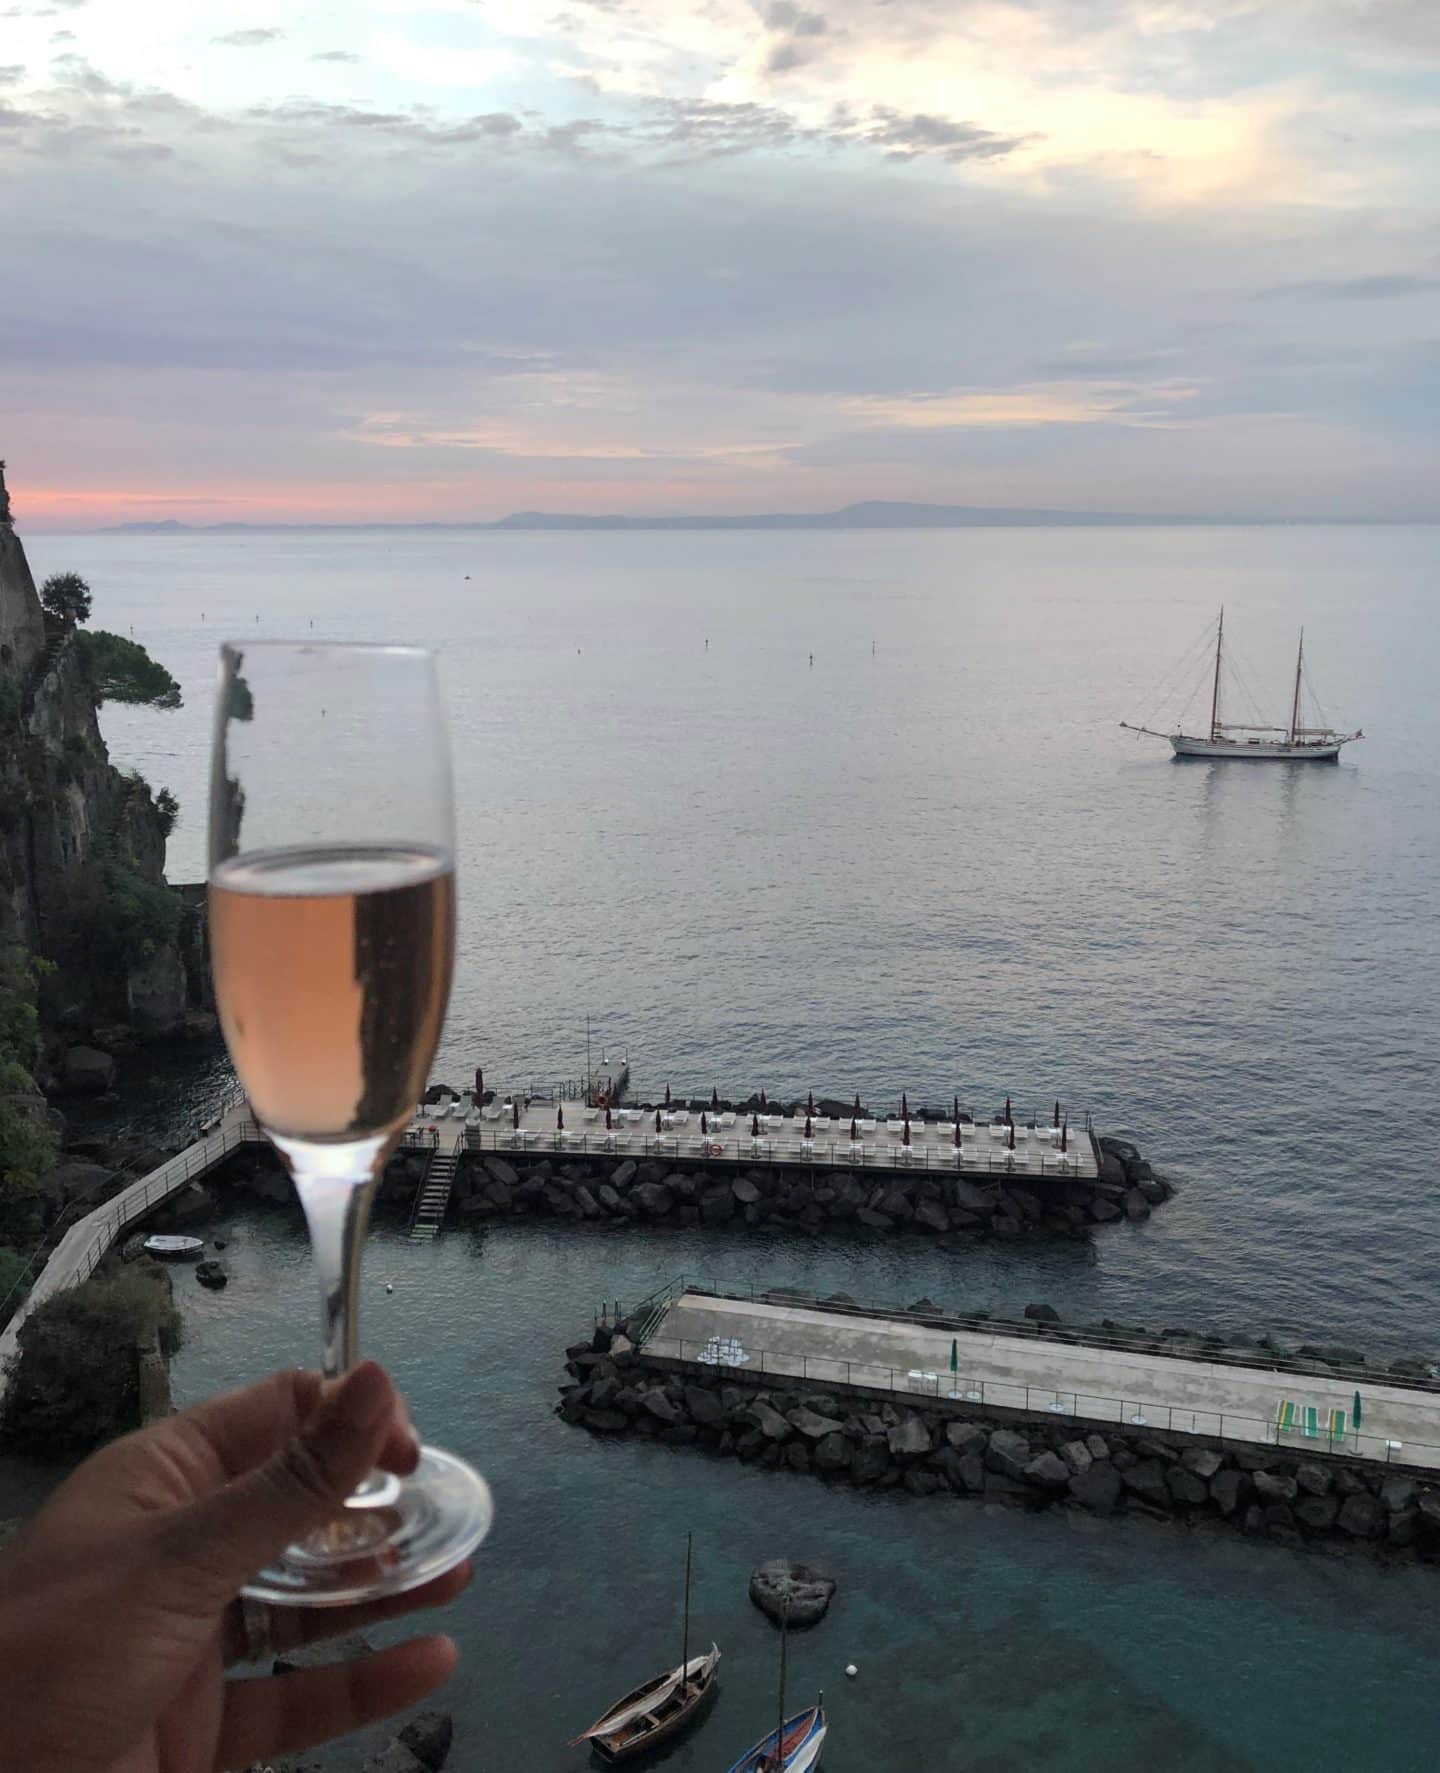 The Bellevue Syrene Hotel Sorrento: A Luxury Hotel Review